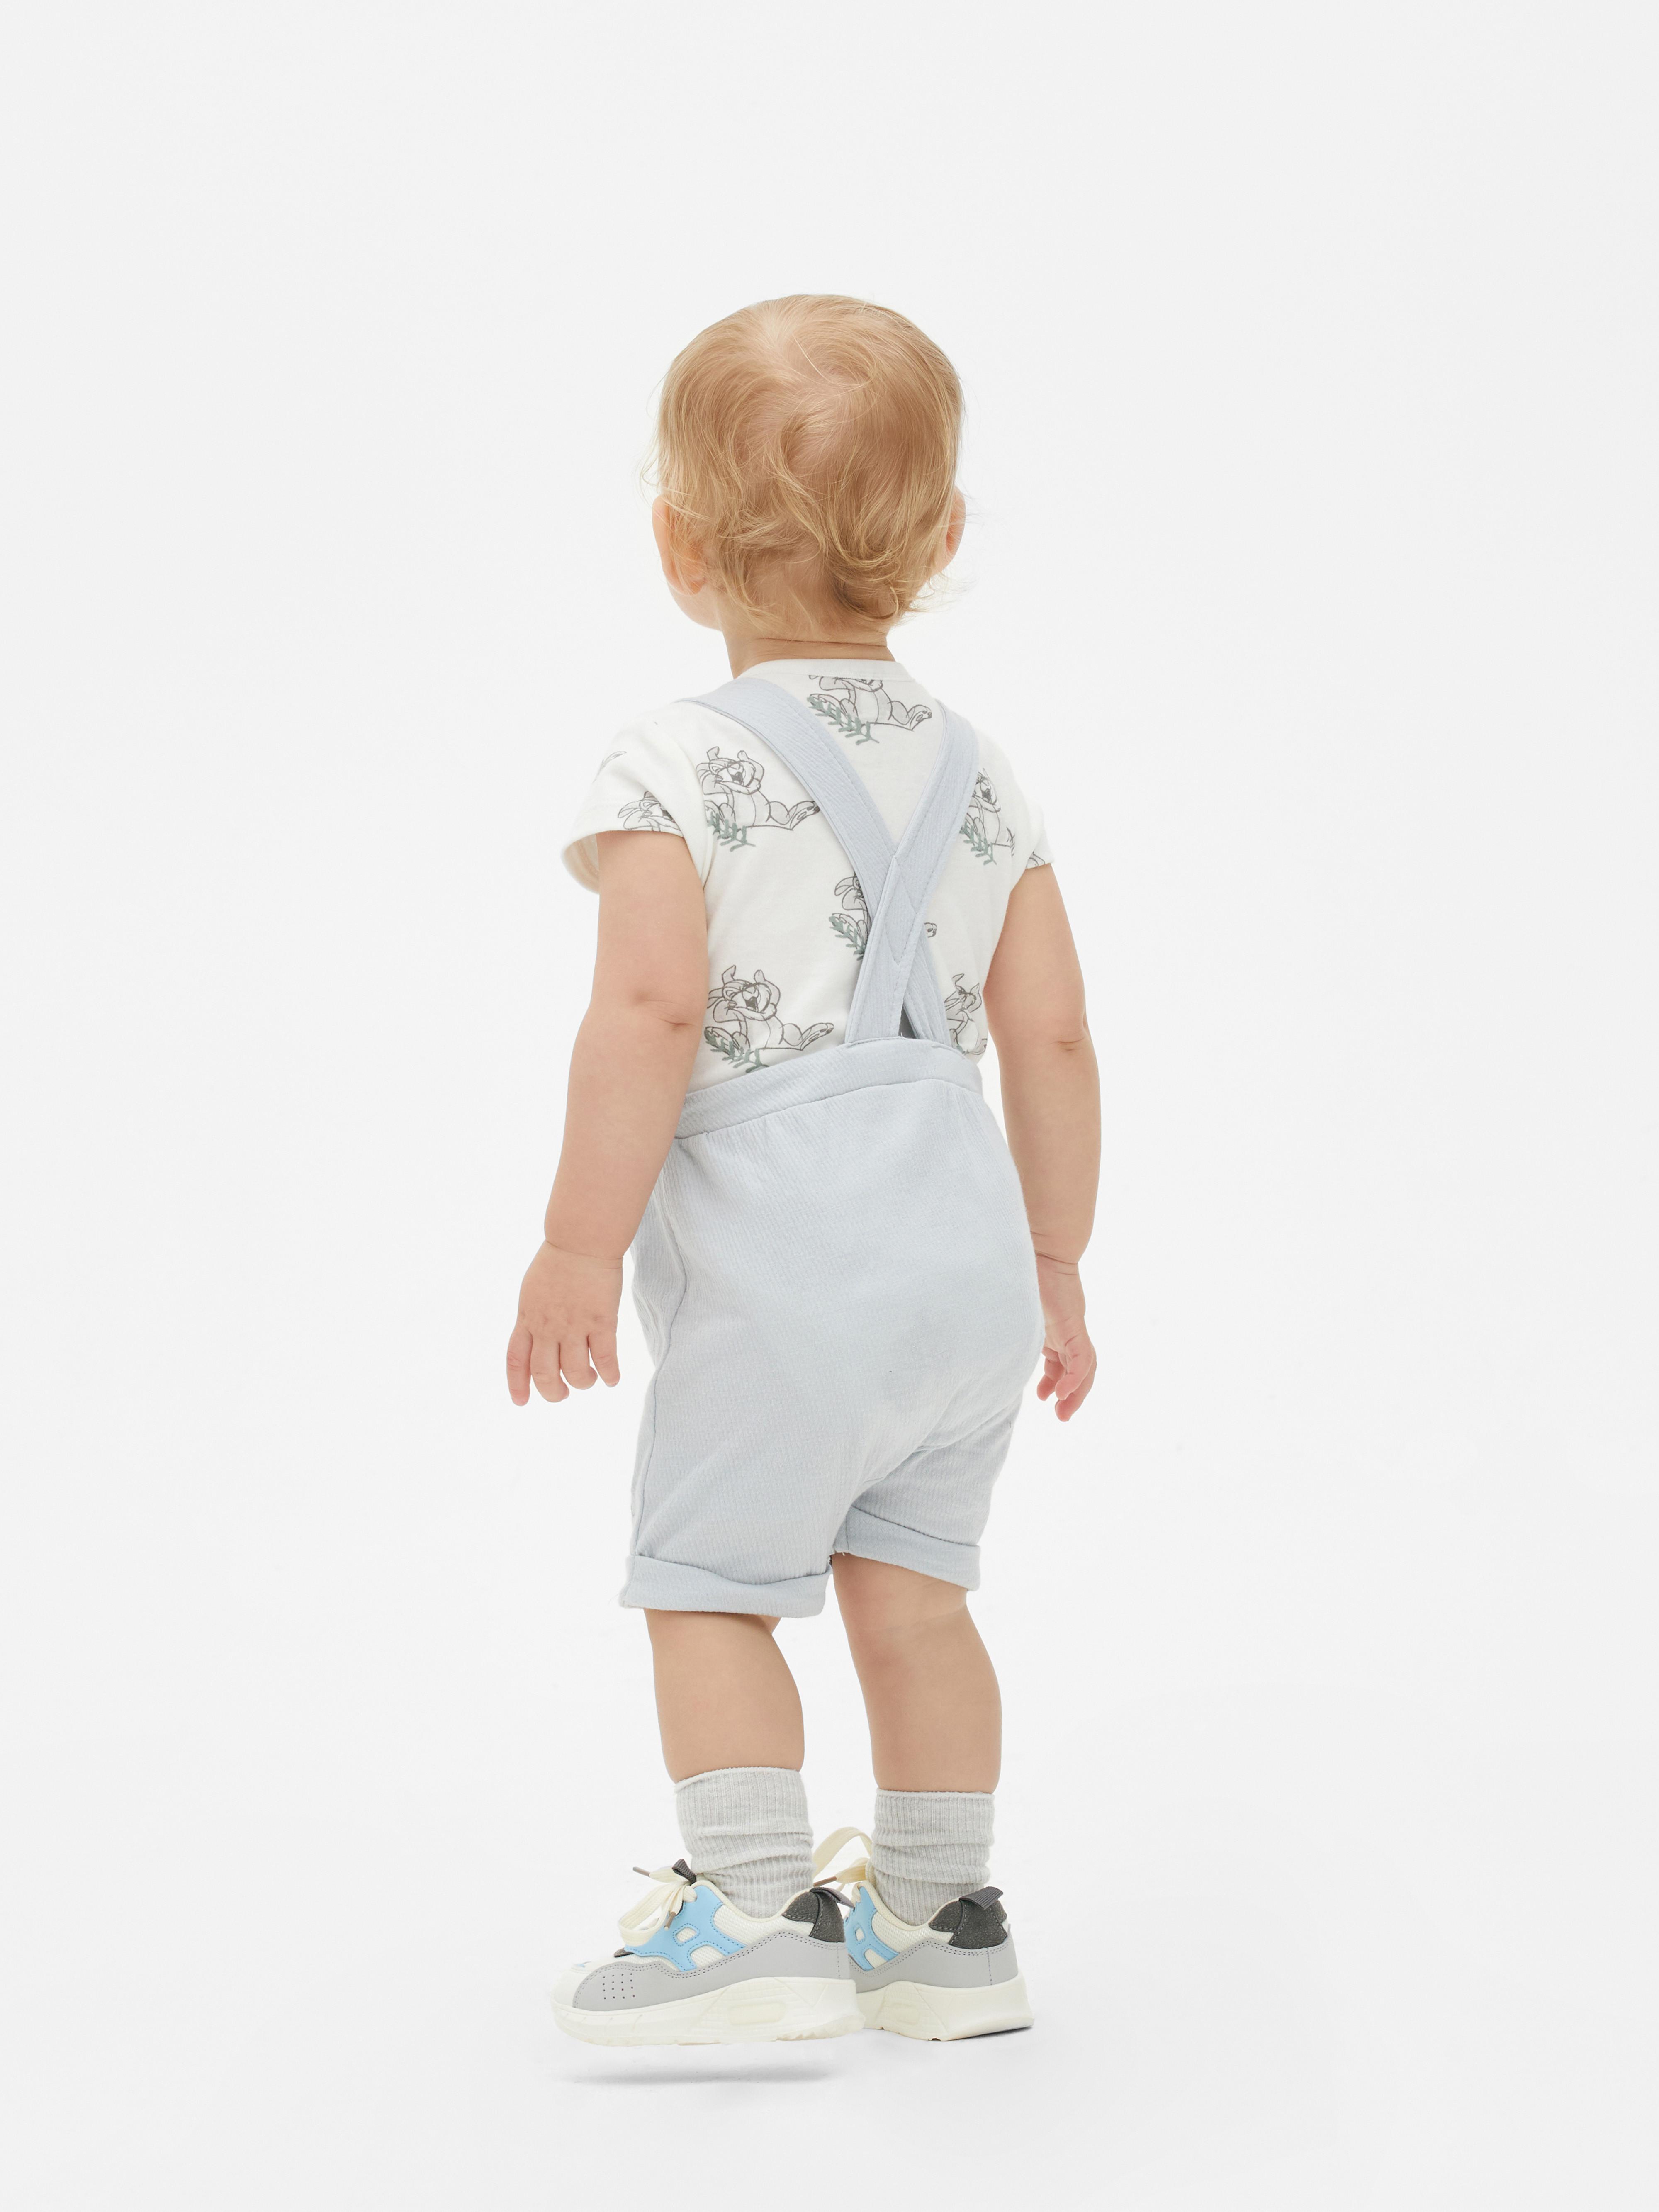 Disney's Bambi and Thumper Dungaree and Bodysuit Set